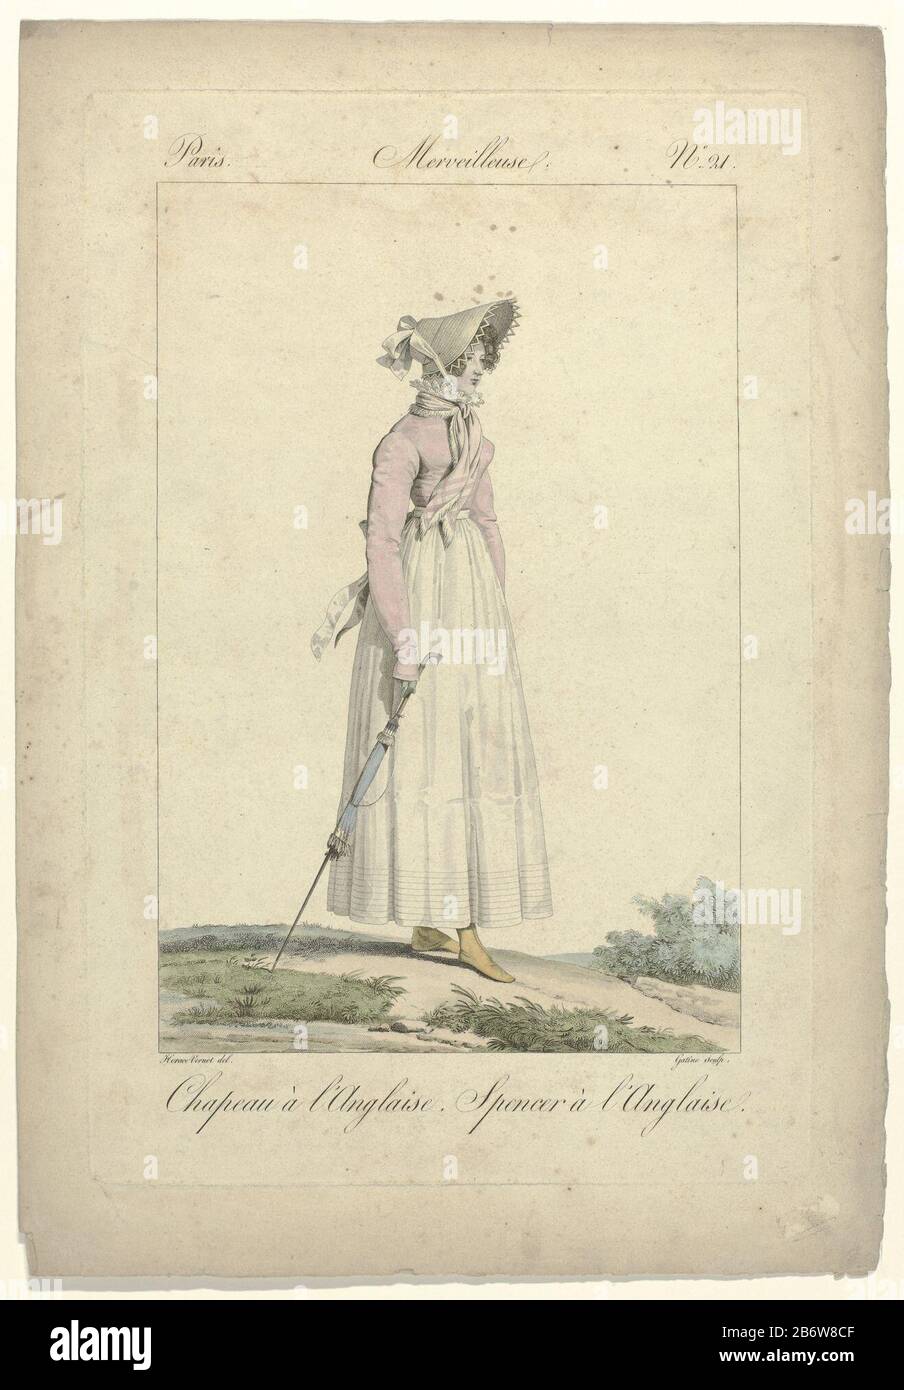 Incroyables et Merveilleuses, 1814, Merveilleuse, No 21 Chapeau a l'Anglais  () "Merveilleuse" with the head a "chapeau à l'Anglaise. She is wearing a  spencer à l'Anglaise "in a skirt. High collar with